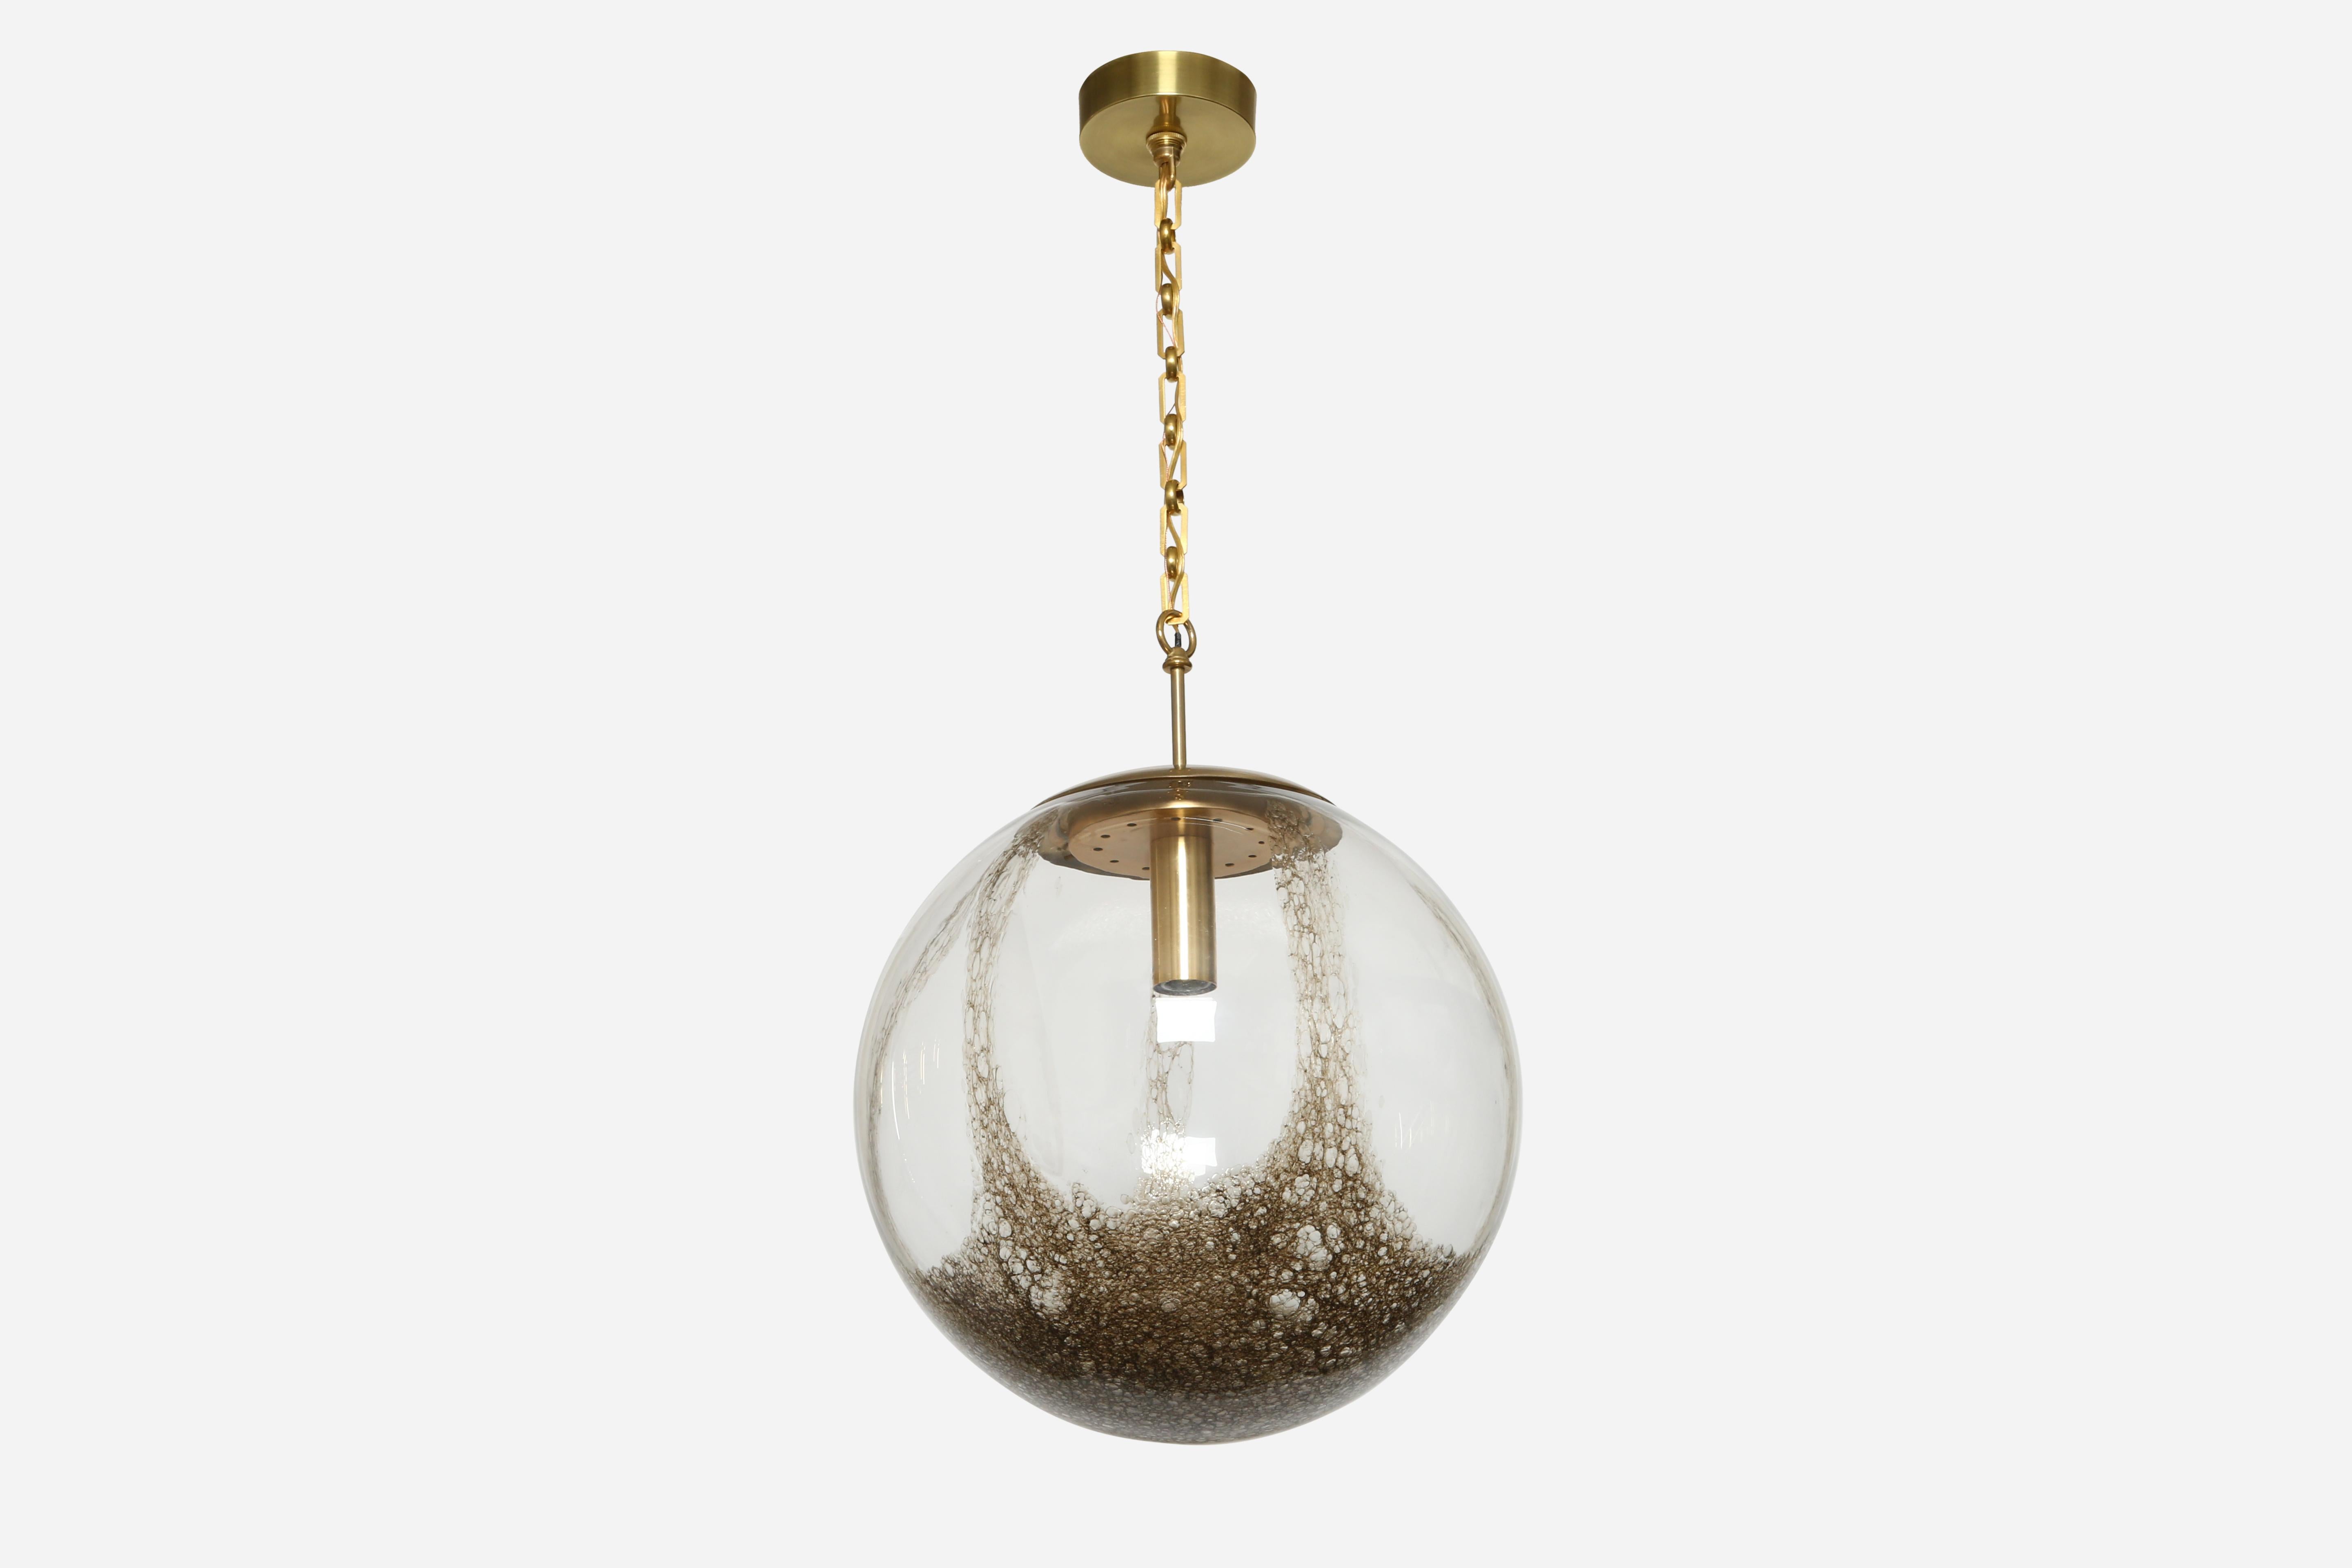 Murano glass ceiling pendant by La Murrina, large.
Italy 1970s
Handblown glass, brass, metal.

We take pride in bringing vintage fixtures to their full glory again.
At Illustris Lighting our main focus is to deliver lighting fixtures to our clients